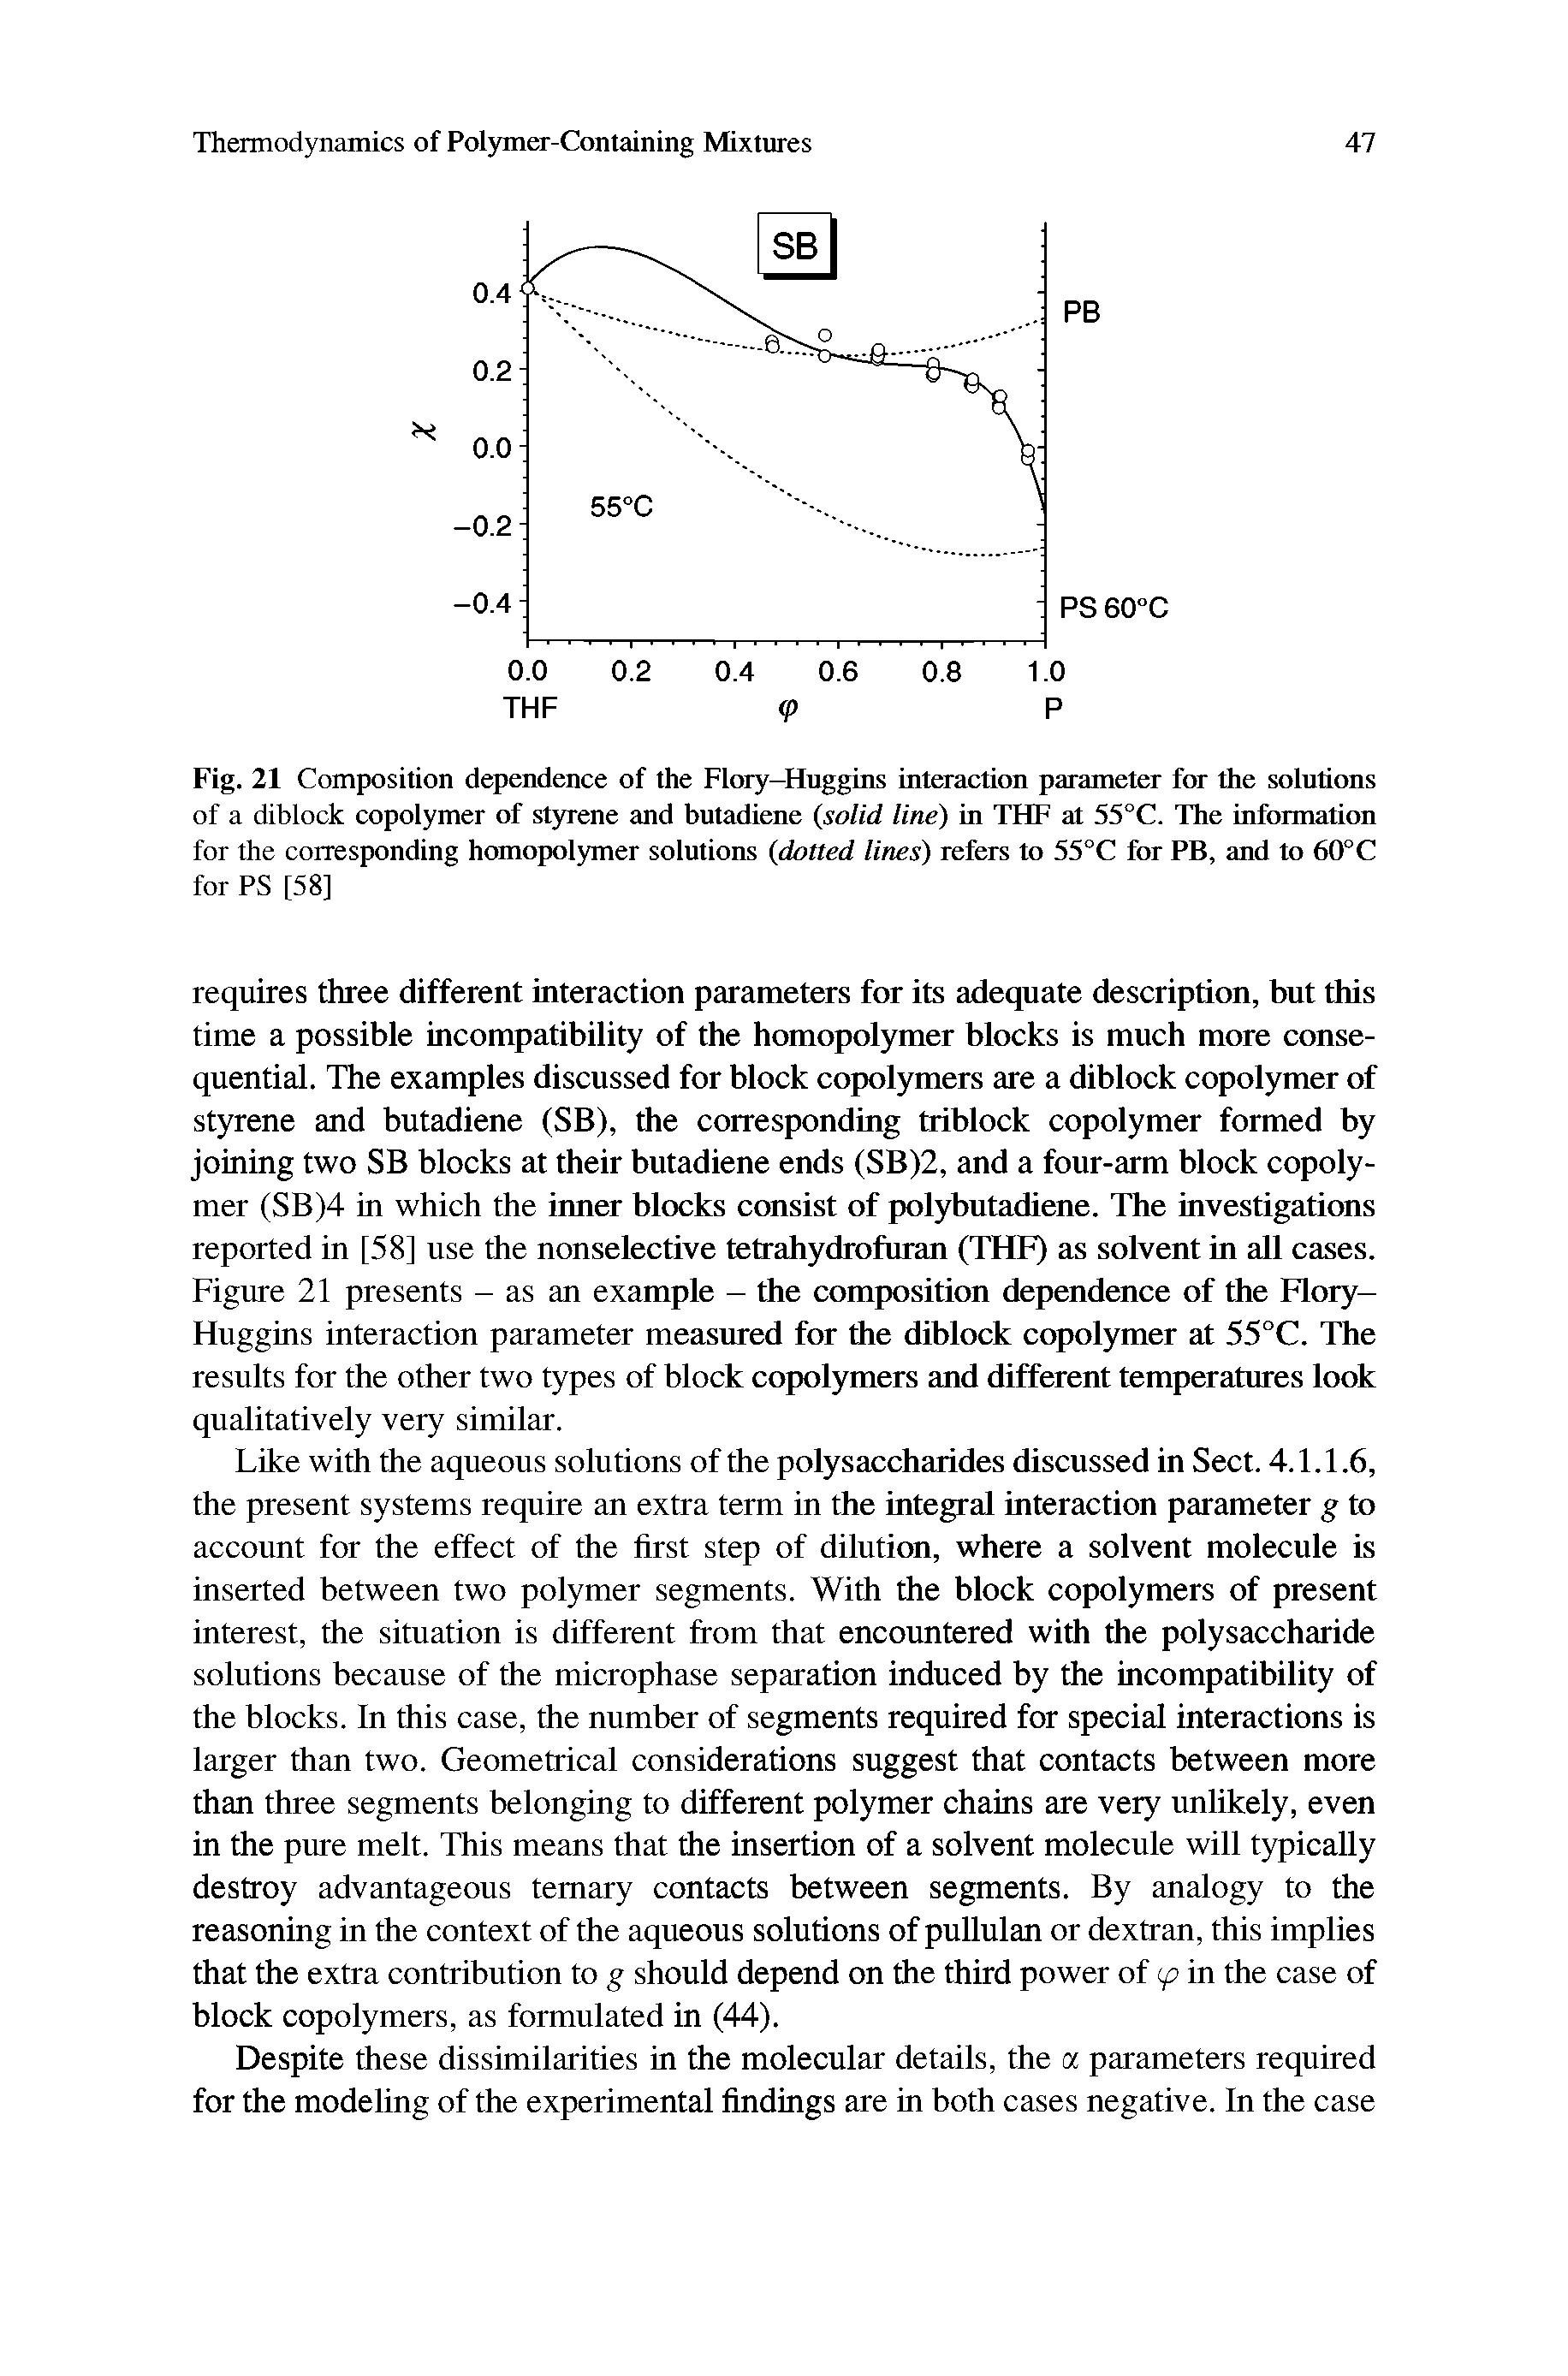 Fig. 21 Composition dependence of the Flory-Huggins interaction parameter for the solutions of a diblock copolymer of styrene and butadiene solid line) in THF at 55°C. The information for the corresponding homopolymer solutions dotted lines) refers to 55°C for PB, and to 60°C for PS [58]...